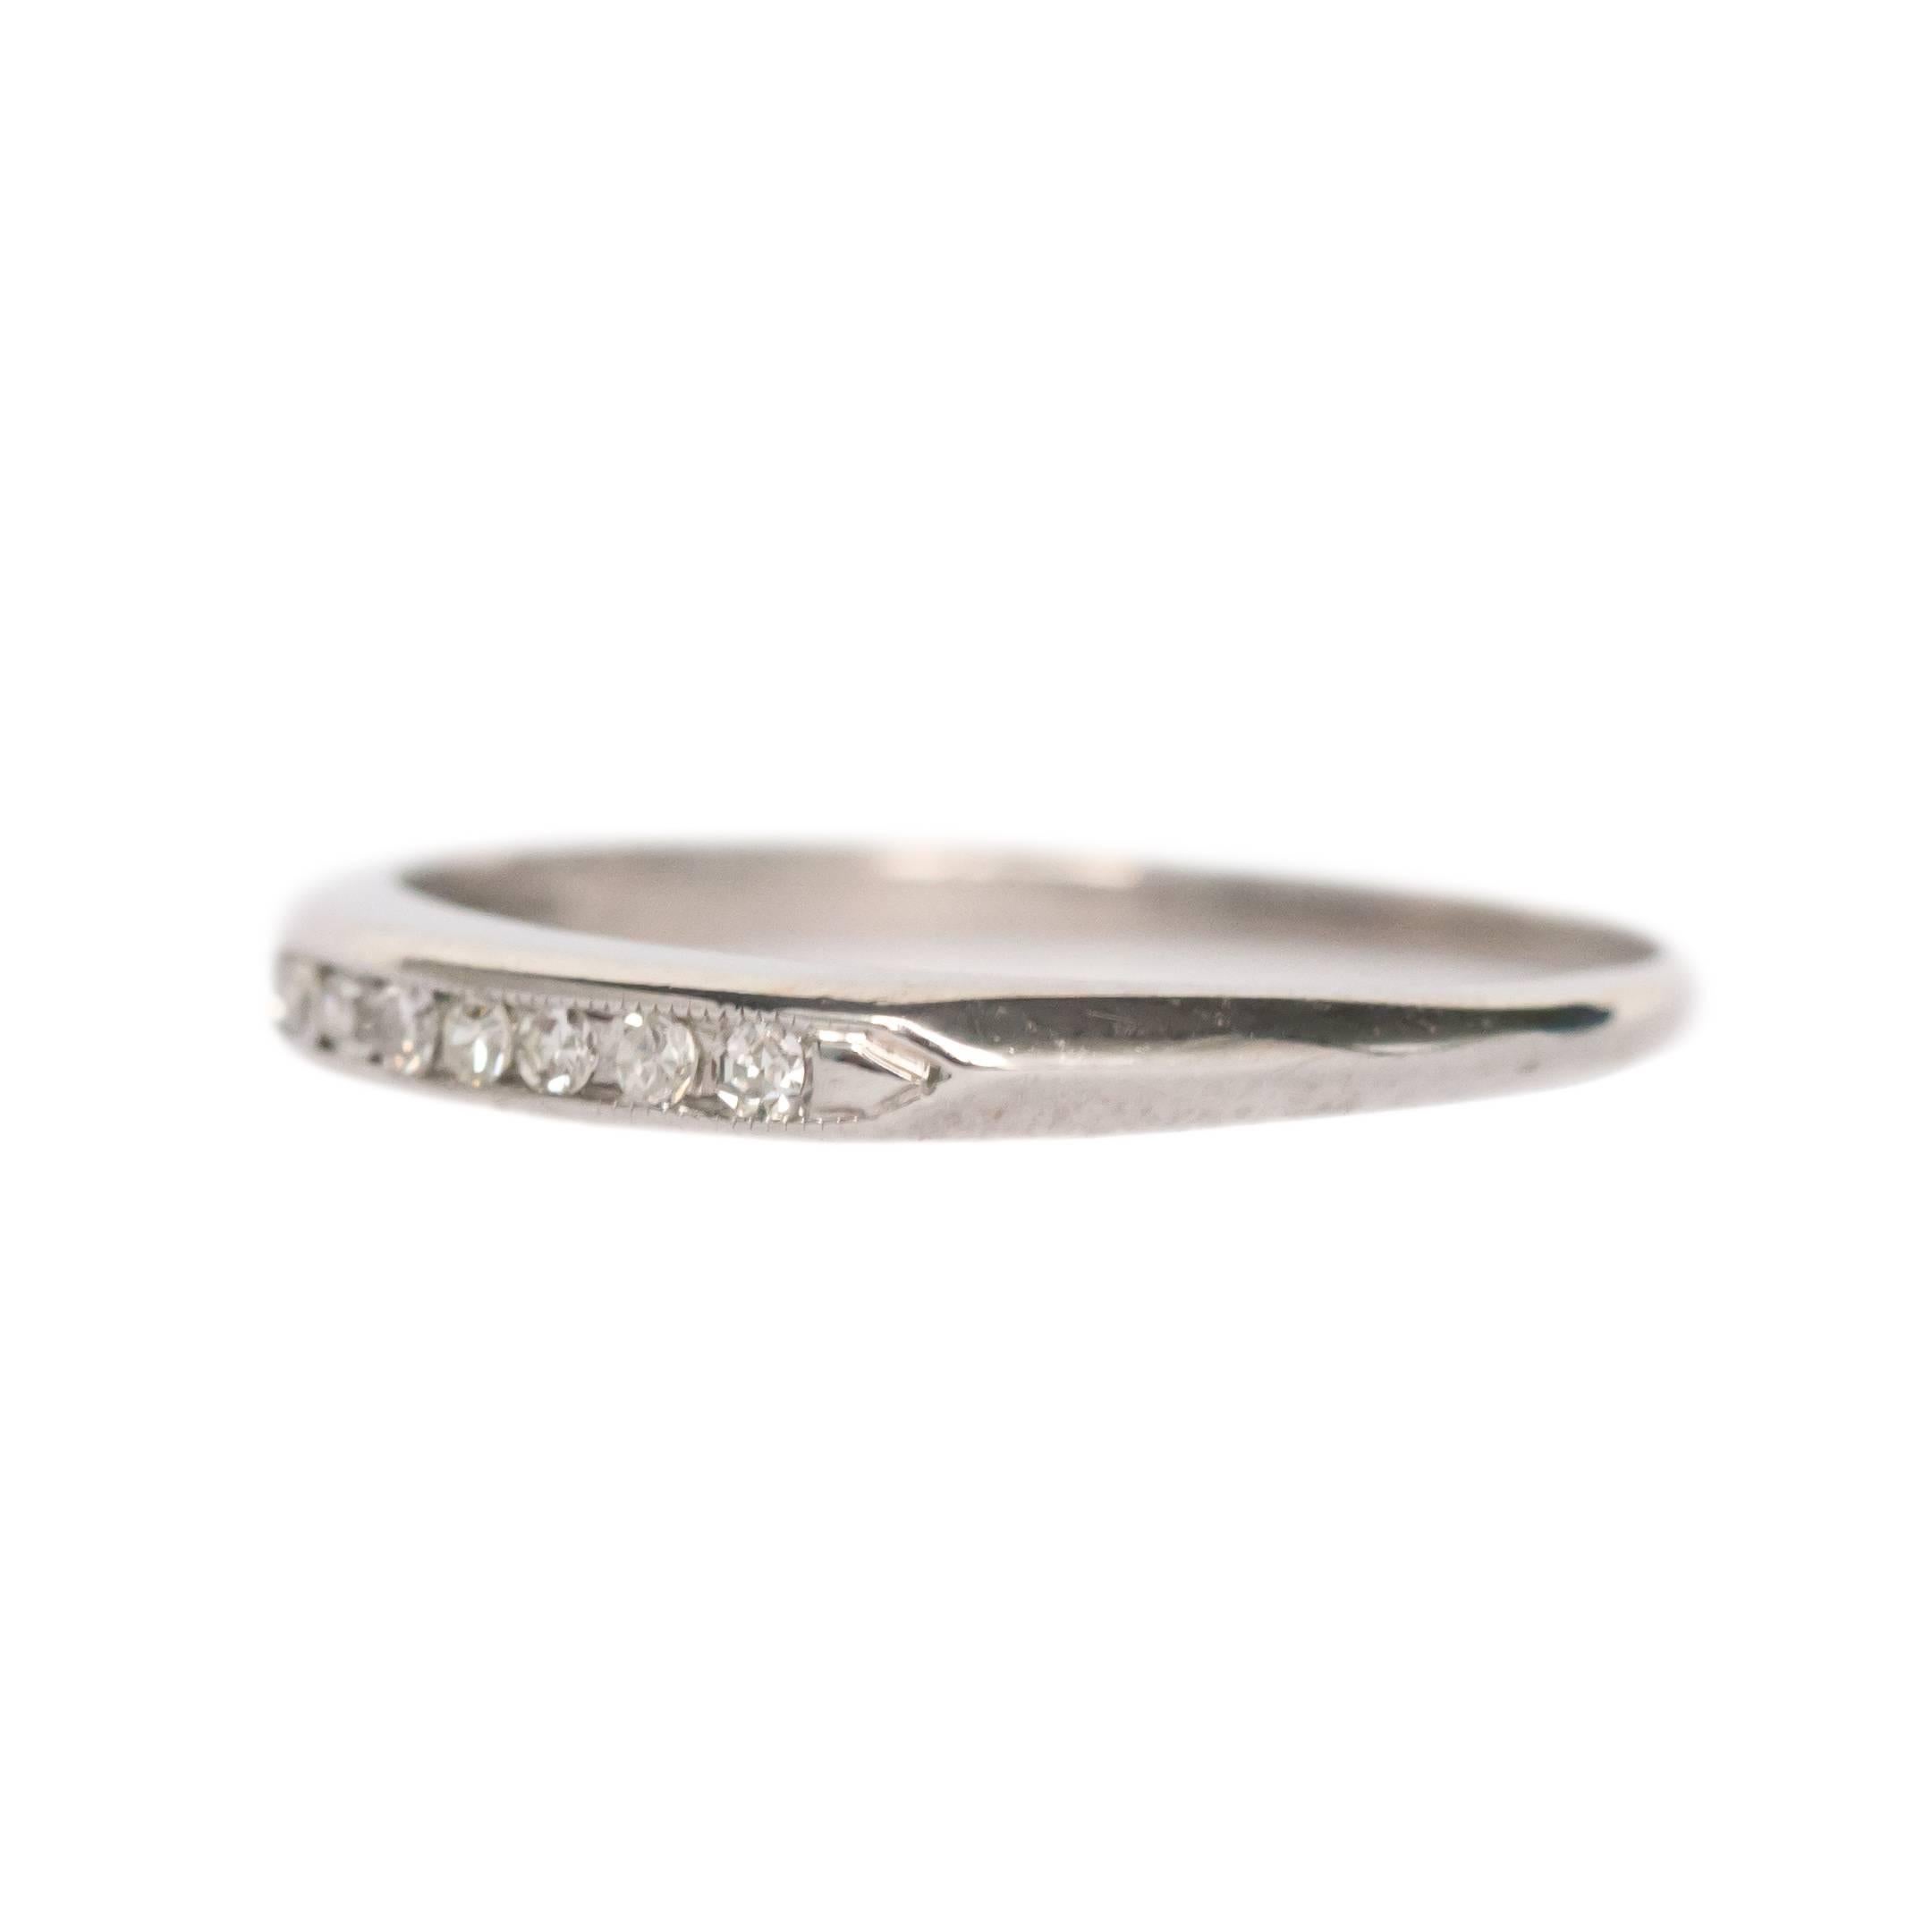 Item Details: 
Ring Size: 6.5
Metal Type: Platinum
Weight: 2.4 grams

Diamond Details:
Shape: Antique Single Cut
Carat Weight: .10 carat, total weight
Color: E
Clarity: VS1

Finger to Top of Stone Measurement: 2.10mm